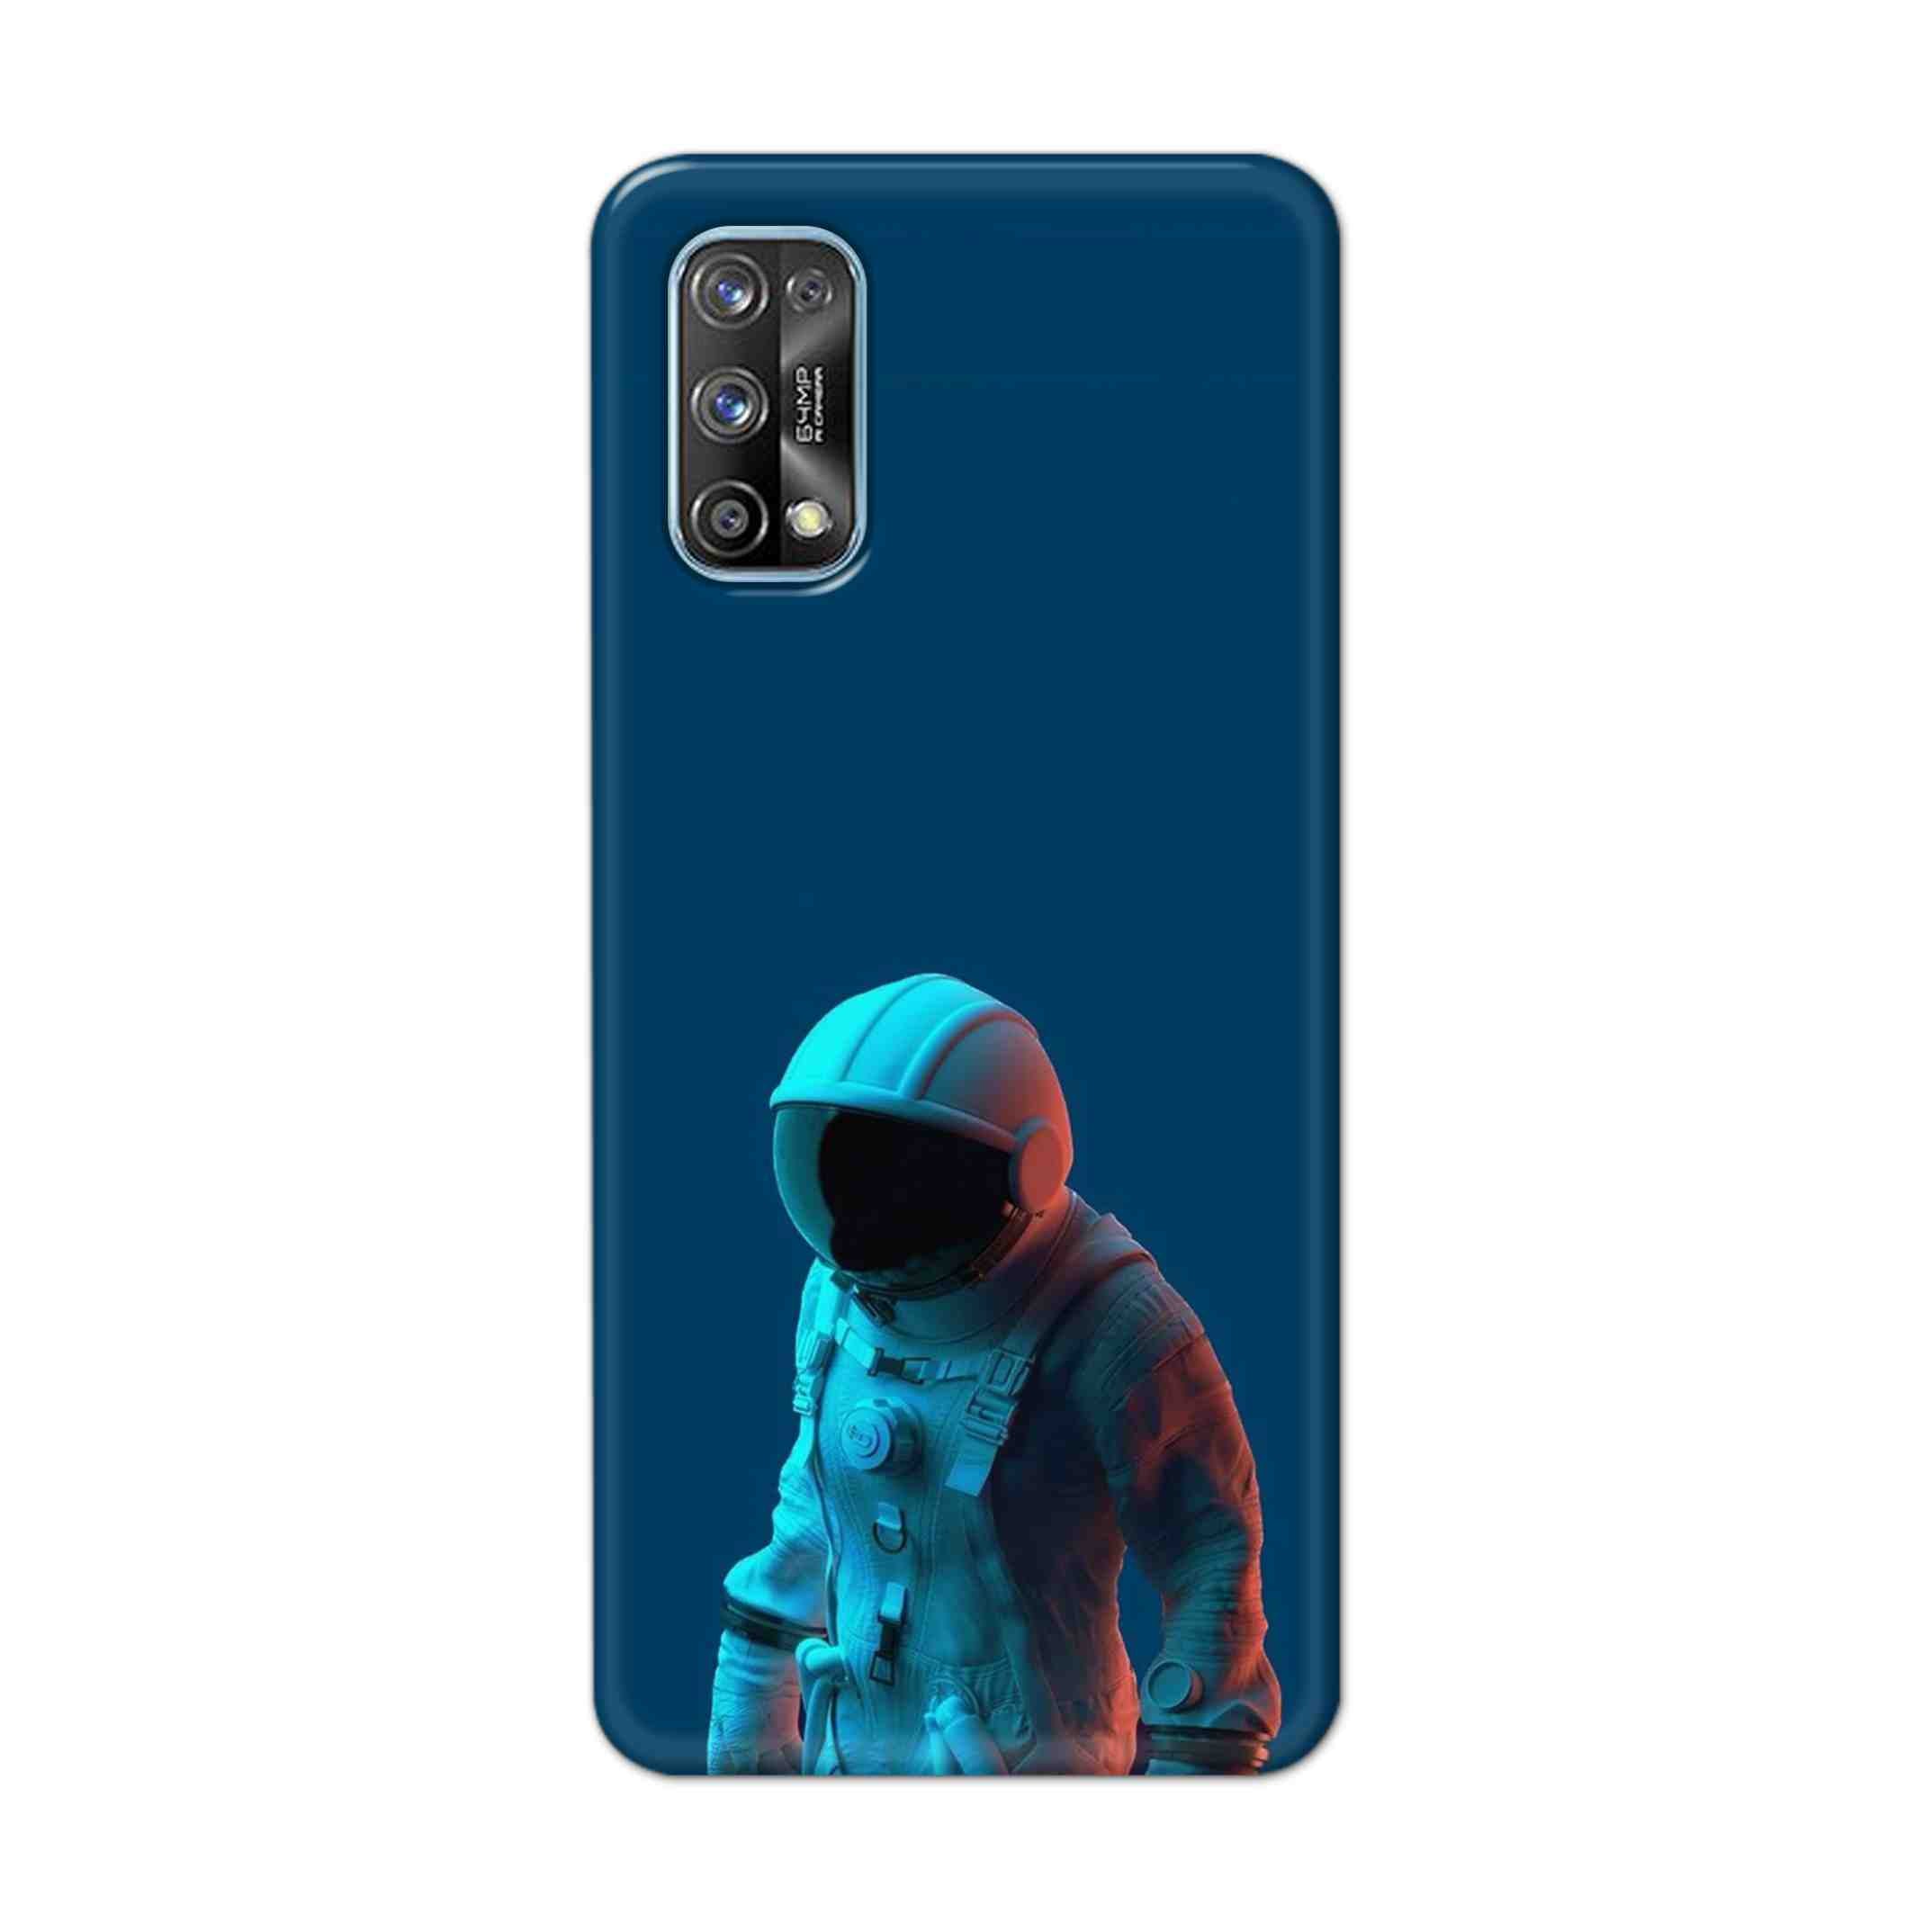 Buy Blue Astronaut Hard Back Mobile Phone Case Cover For Realme 7 Pro Online